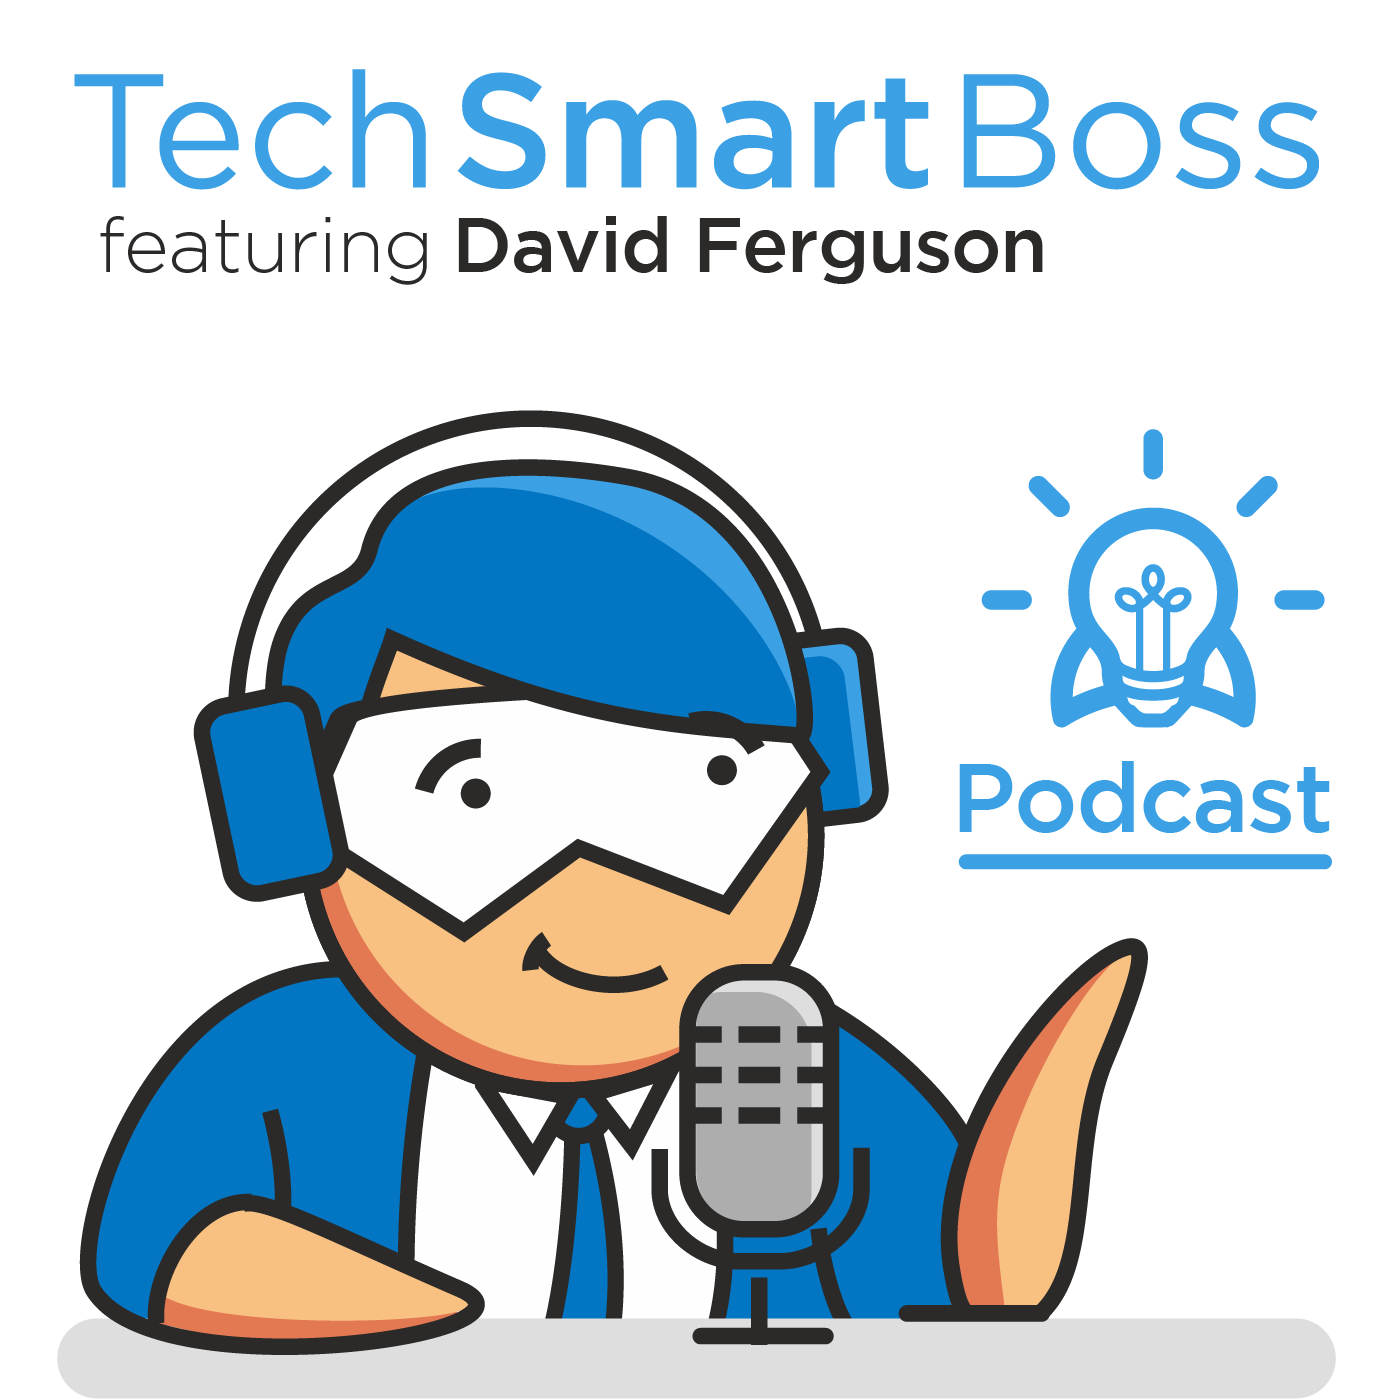 Episode 127:  How To Hire A Project Manager (The Tech Smart Boss Way)